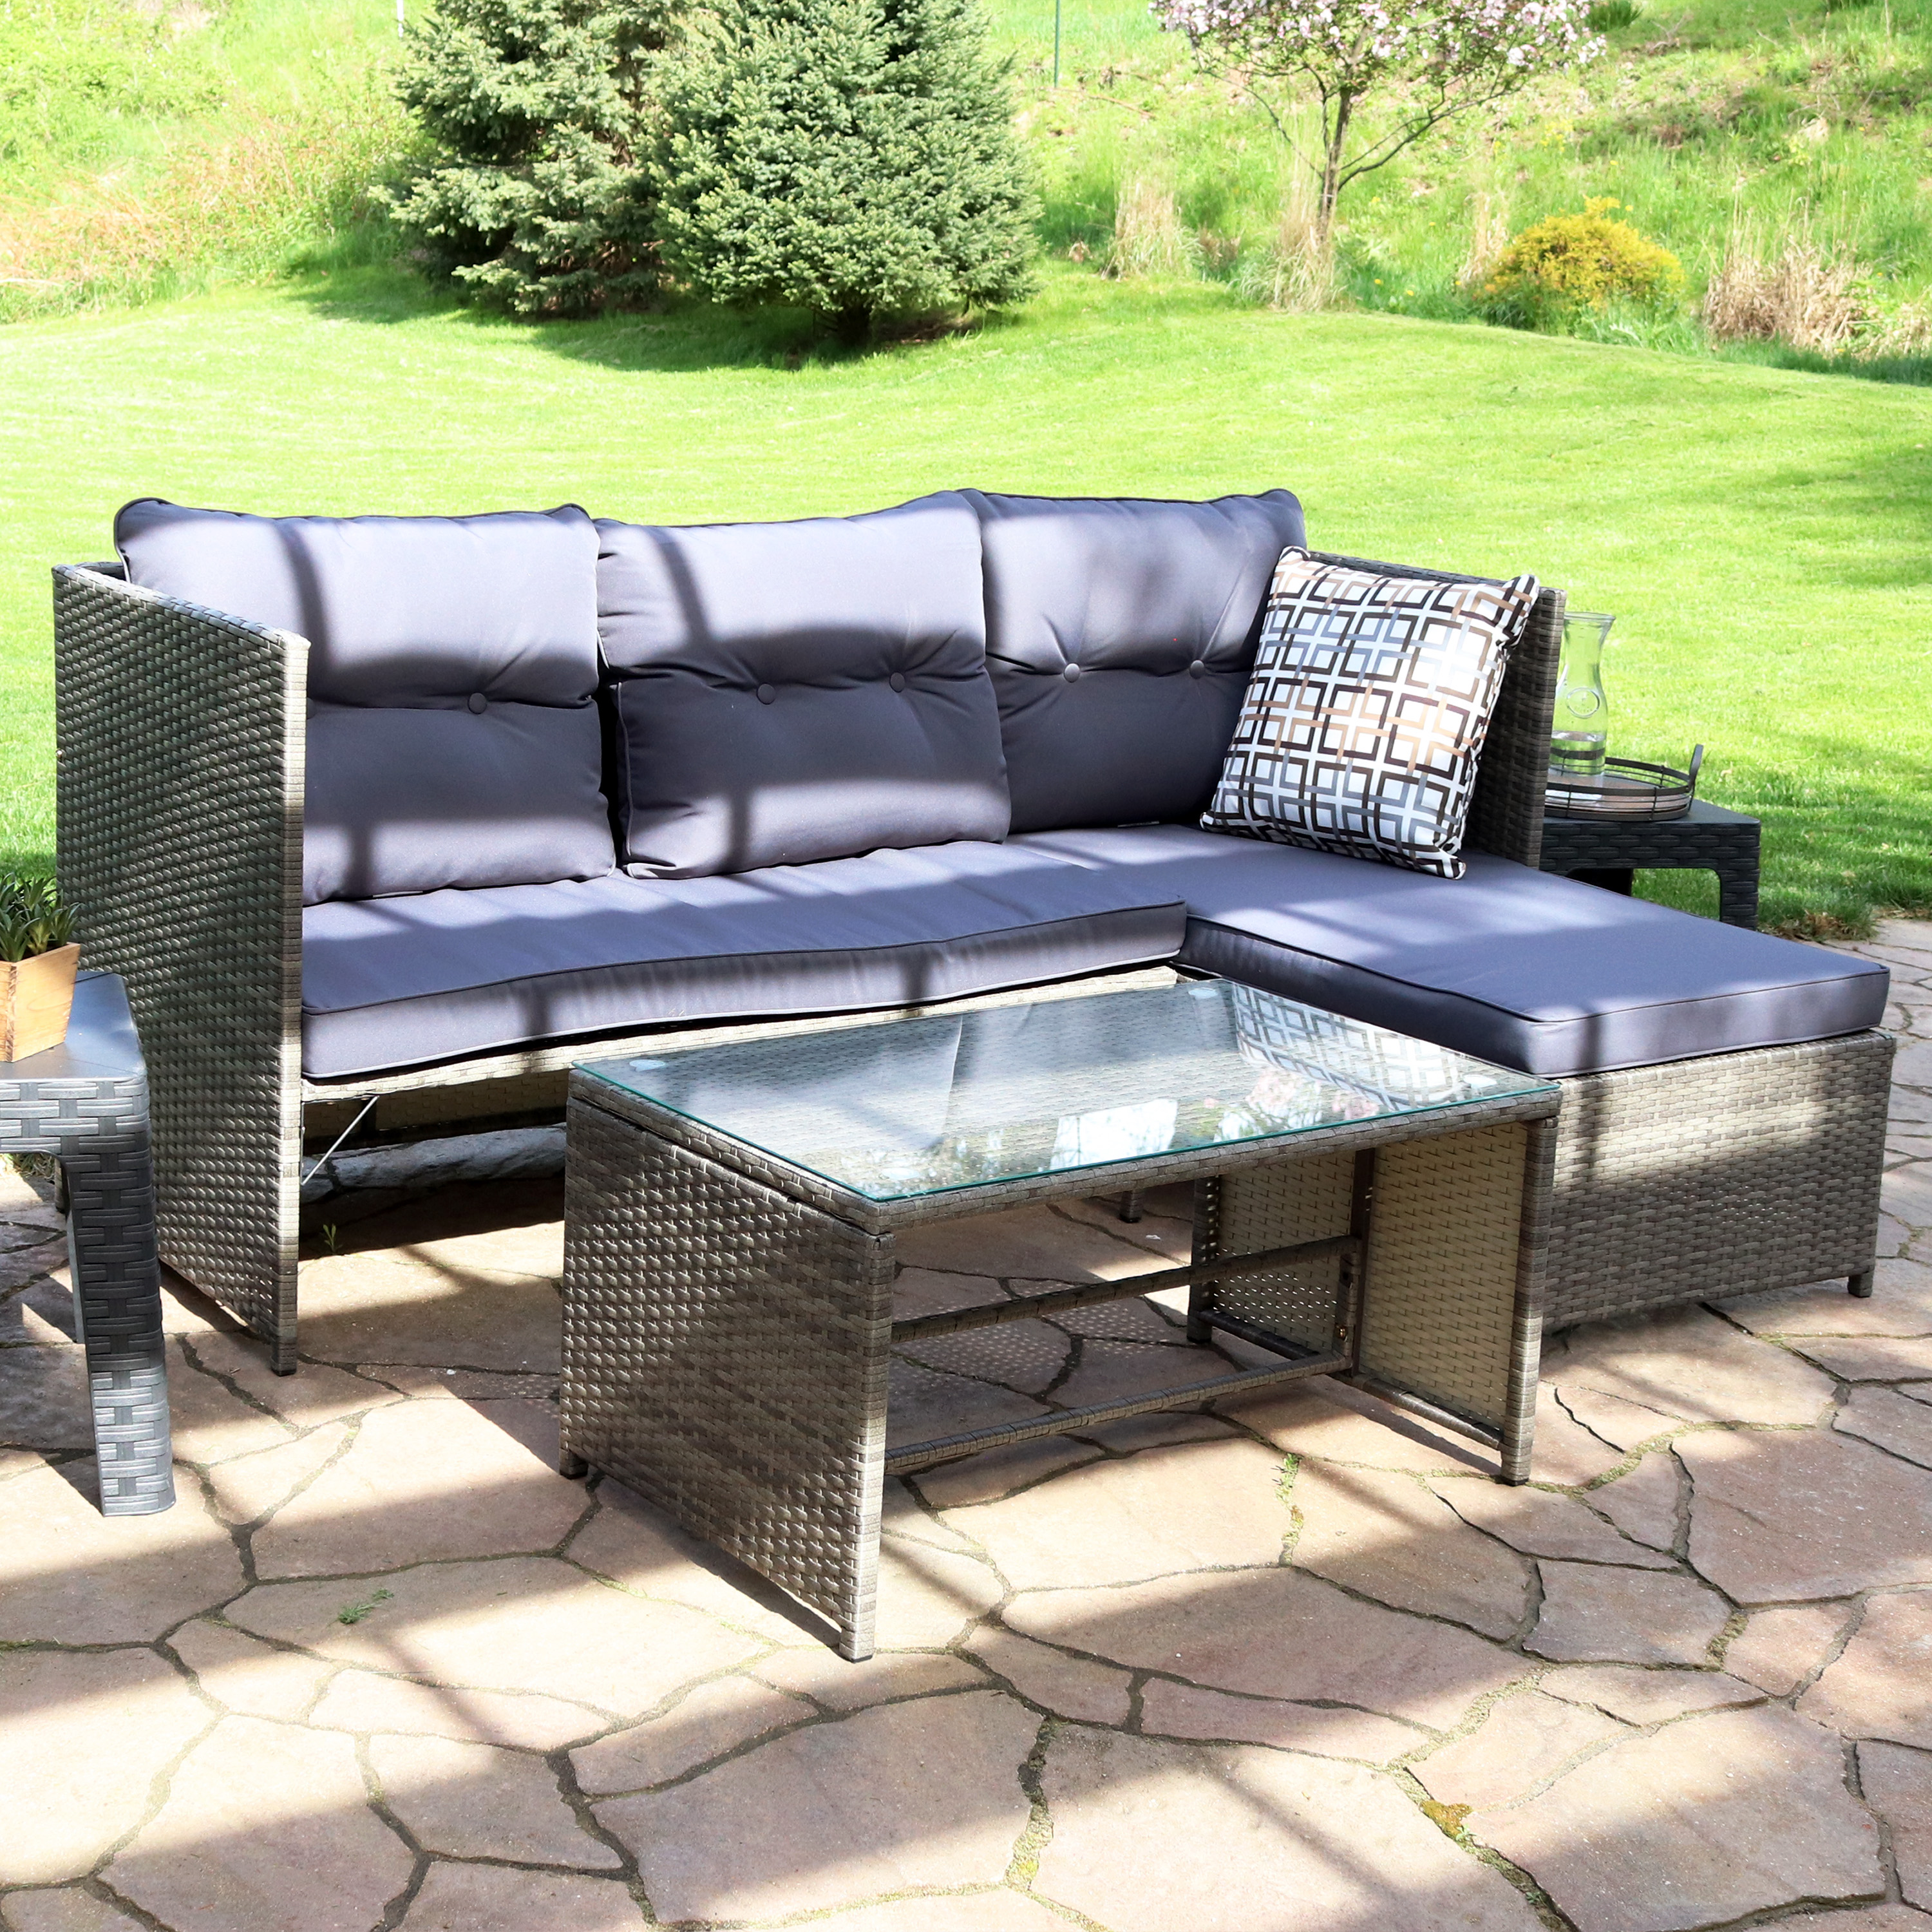 Sunnydaze Longford Outdoor Patio Sectional Sofa Set with Cushions - Charcoal - image 2 of 12